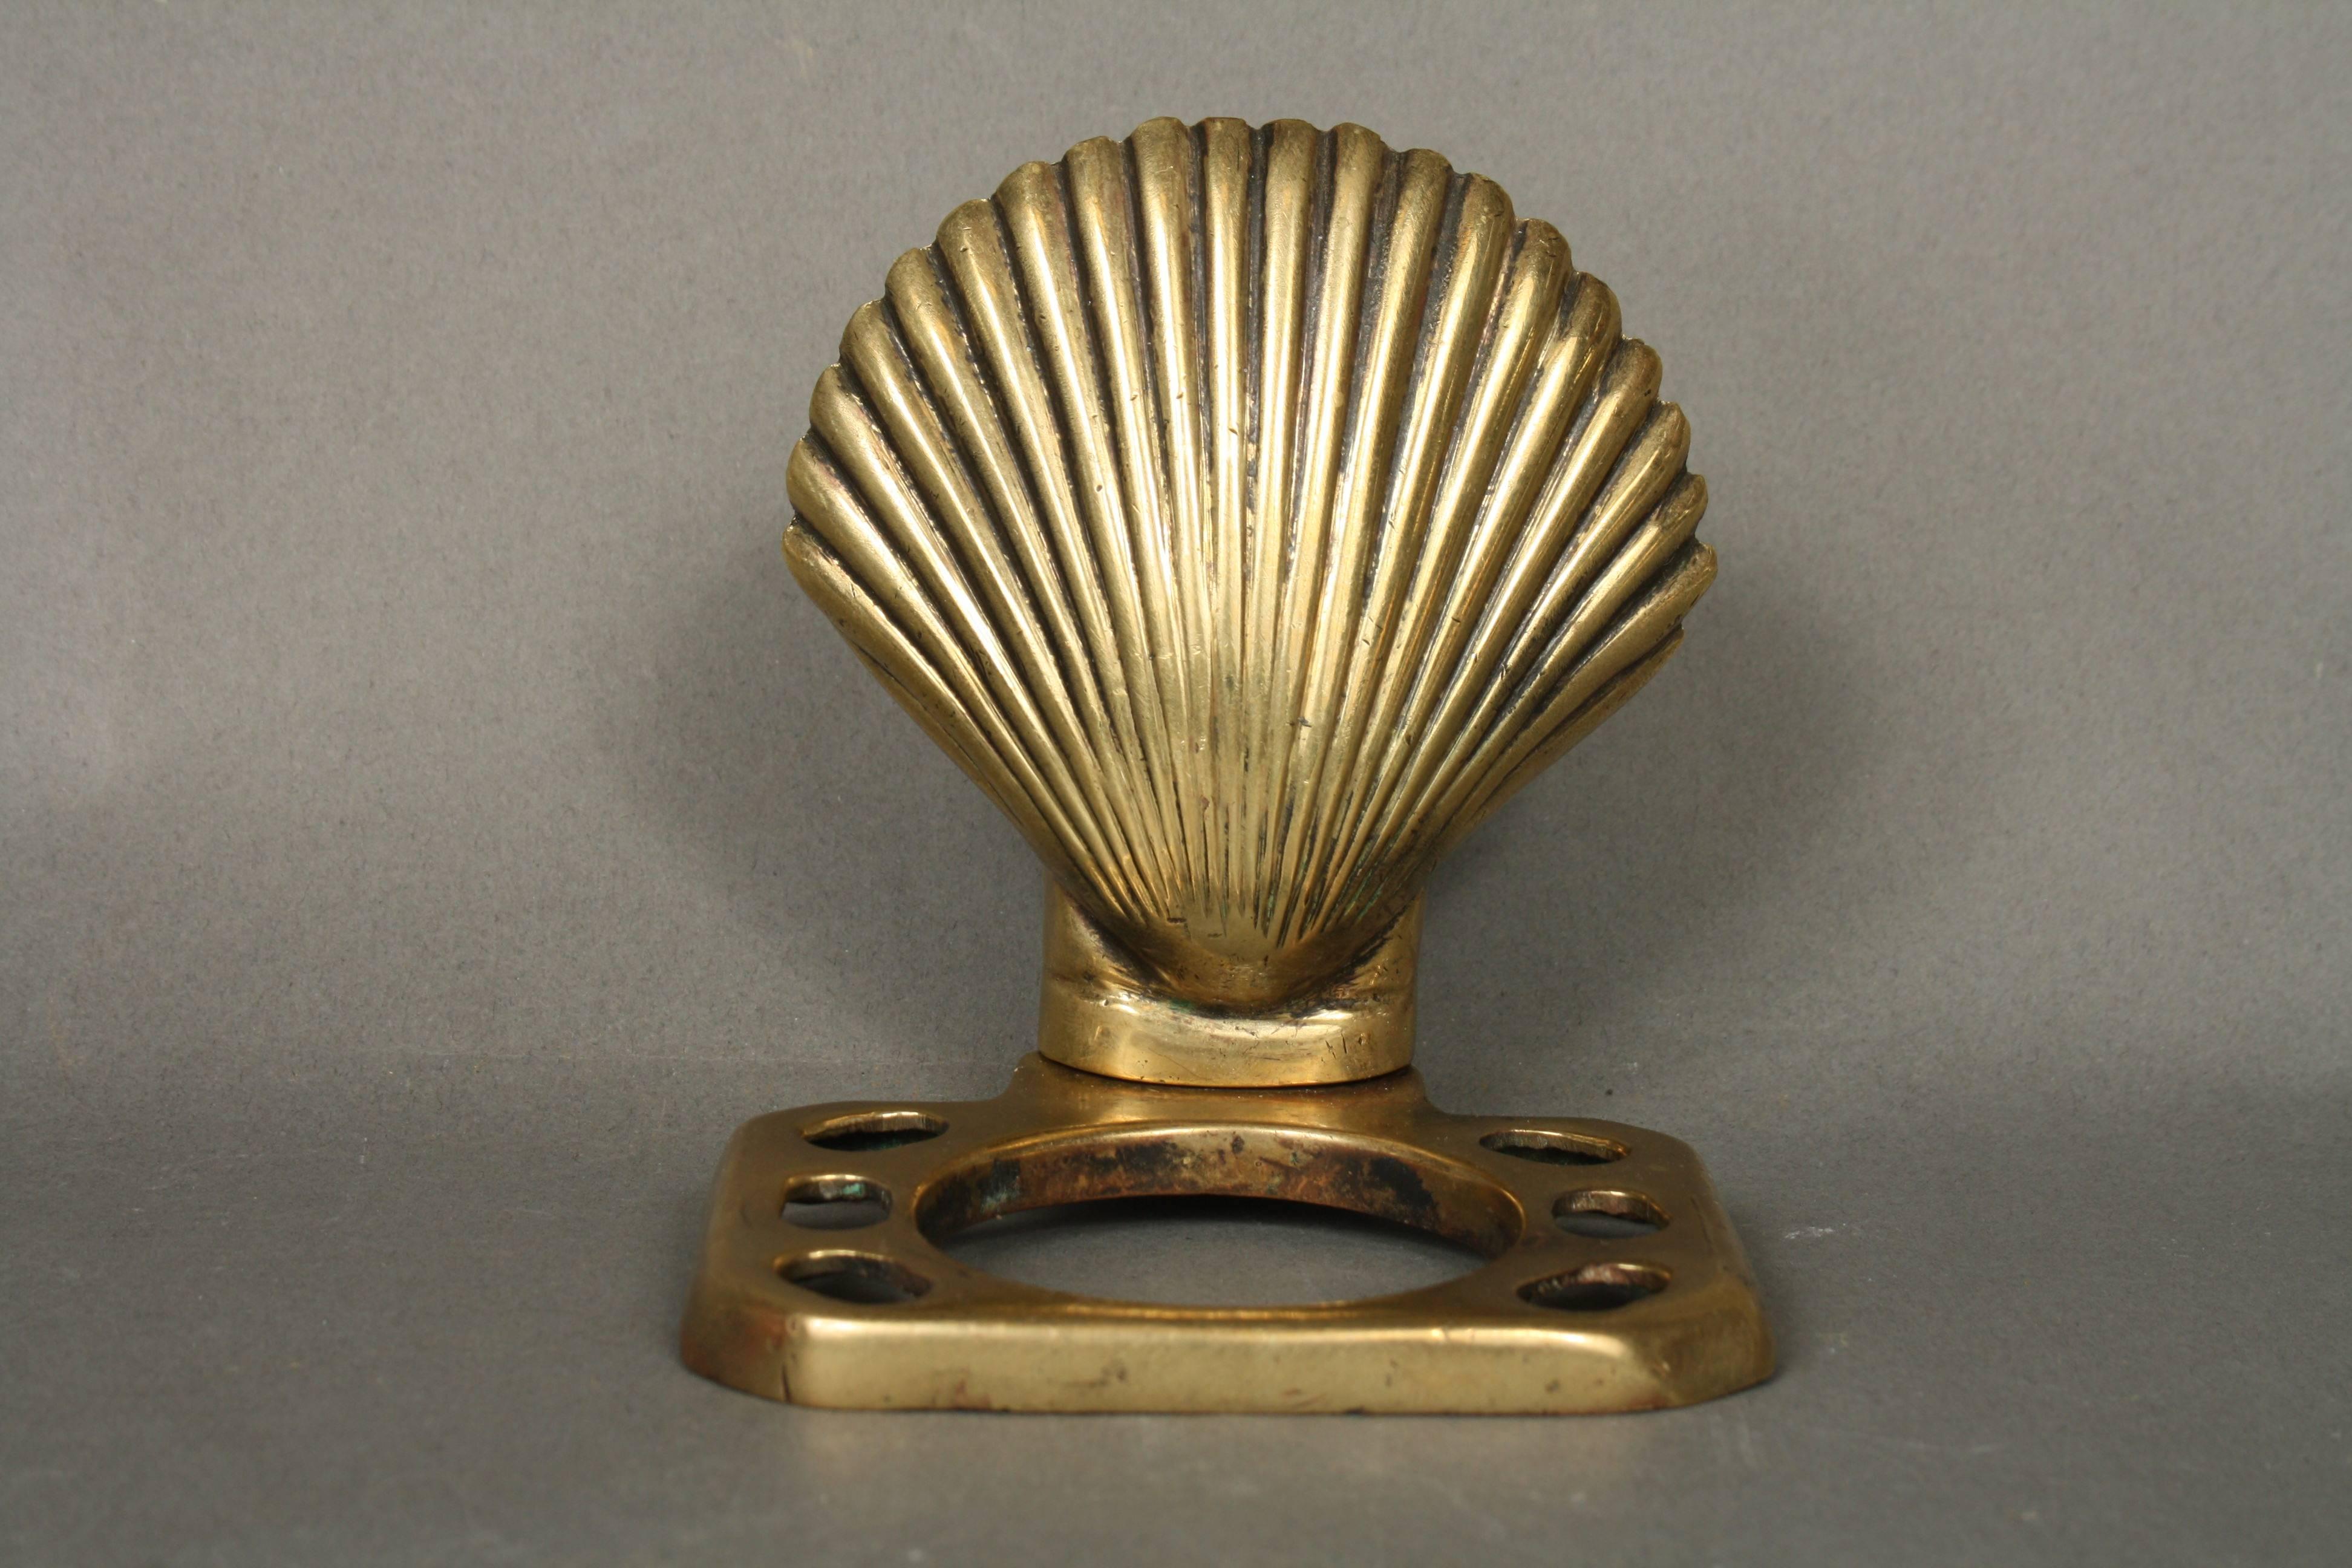 Shell Shaped Soap Dish and Toothbrush Holder, Brass, 1950s For Sale 1